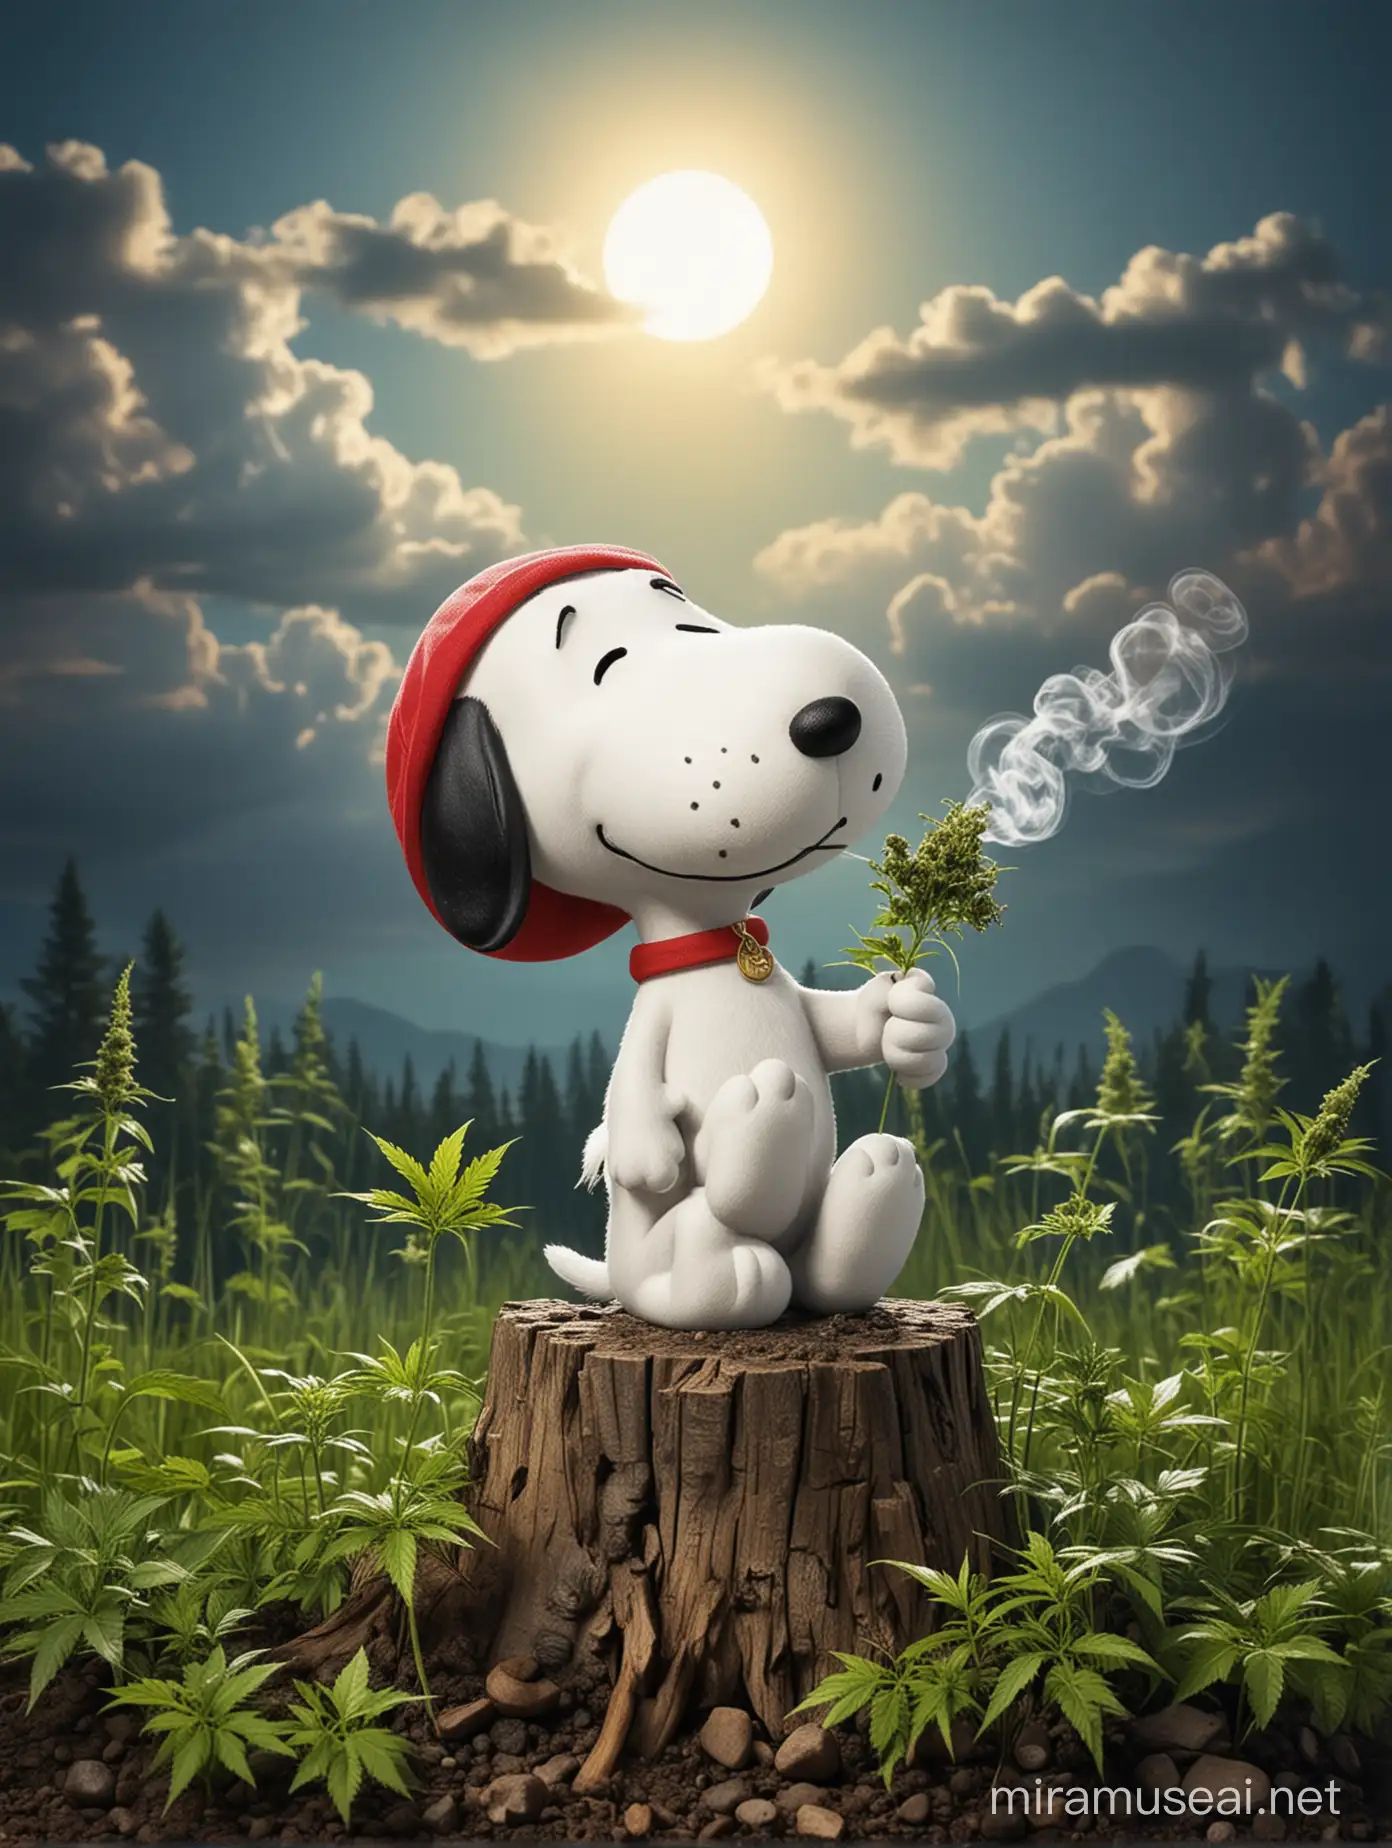 Snoopy high on weed